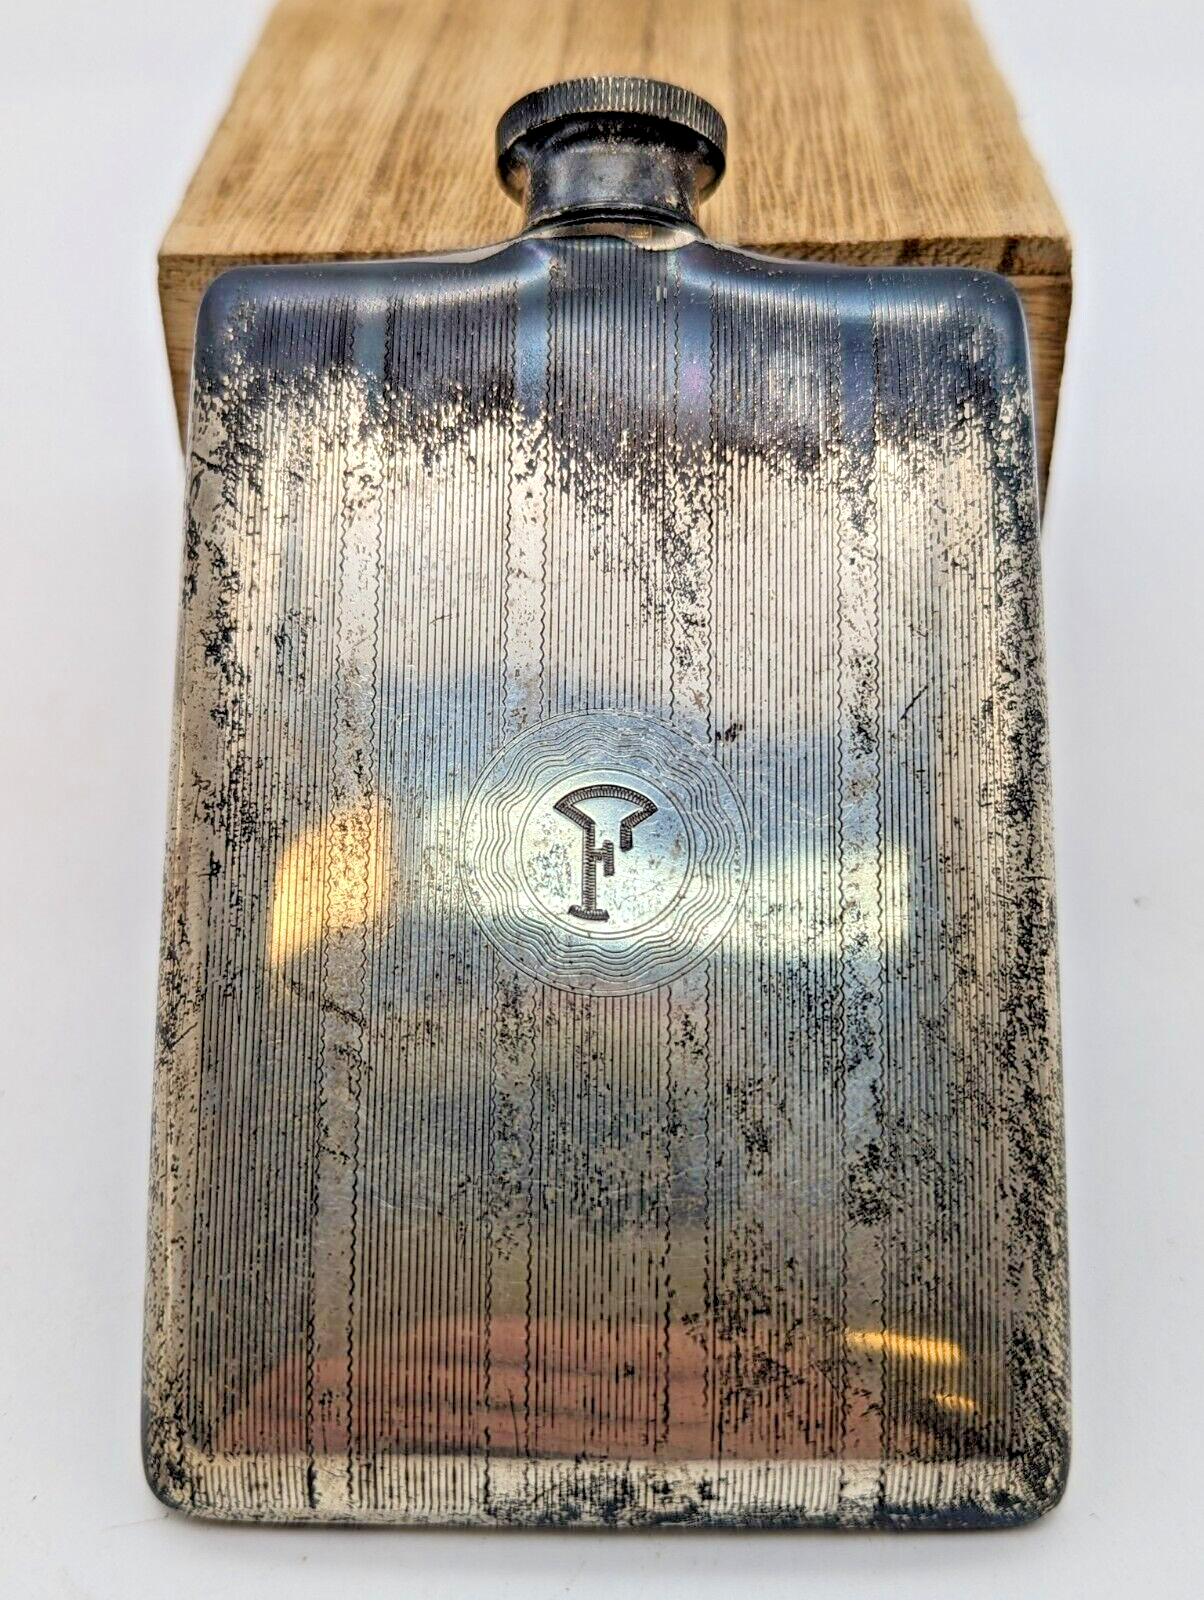 Primary image for Art deco sterling silver Hip flask Early 1900's